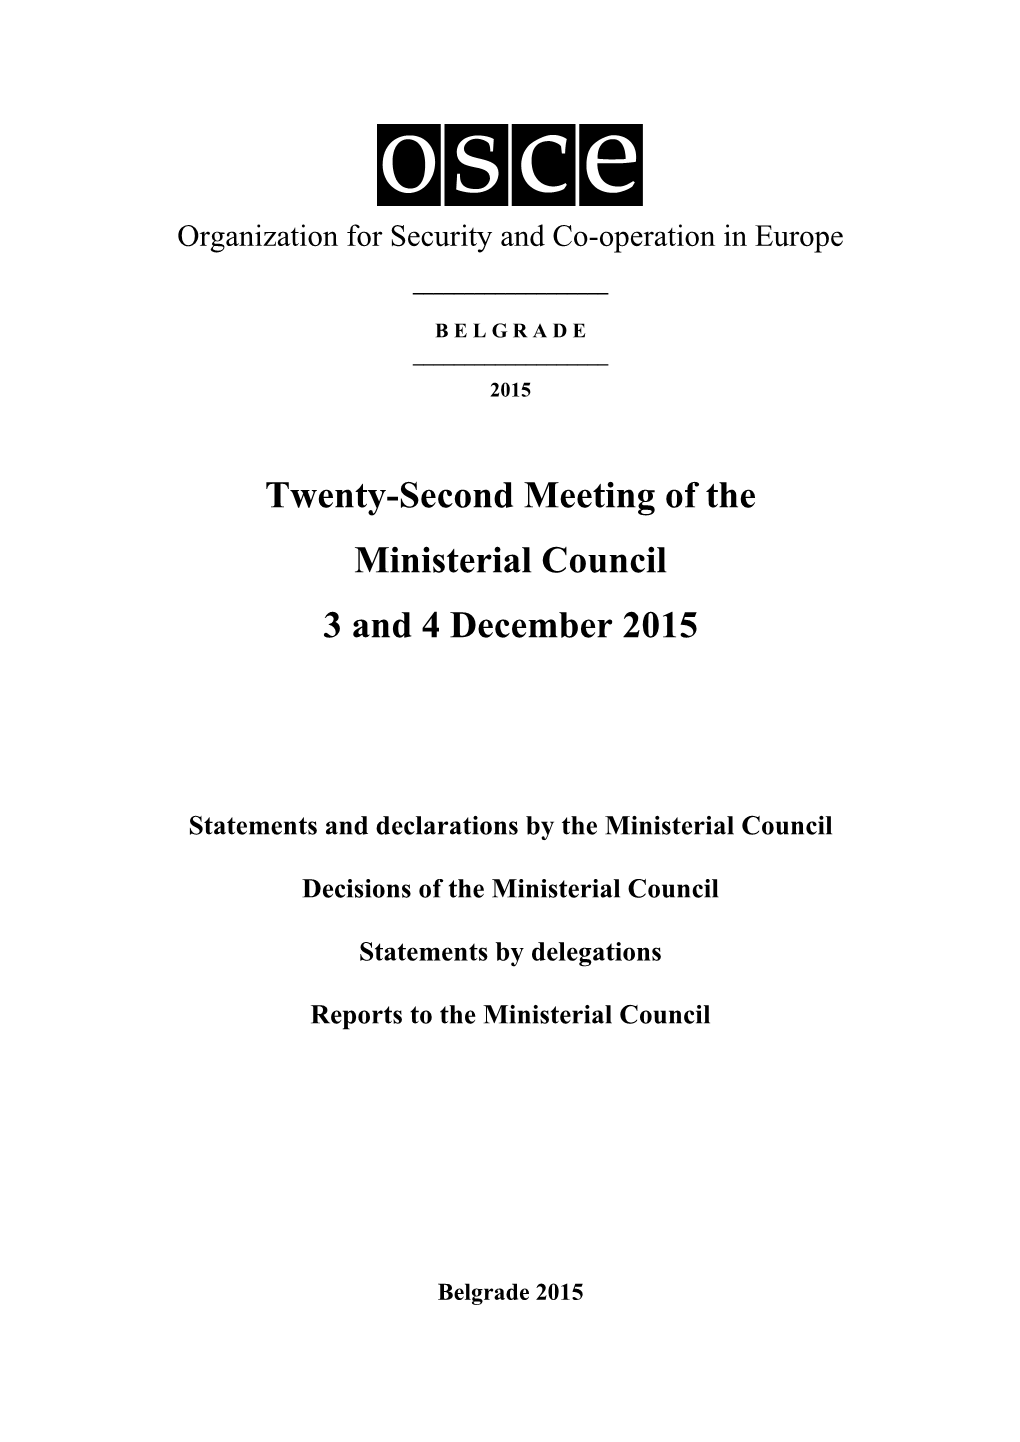 Twenty-Second Meeting of the Ministerial Council 3 and 4 December 2015